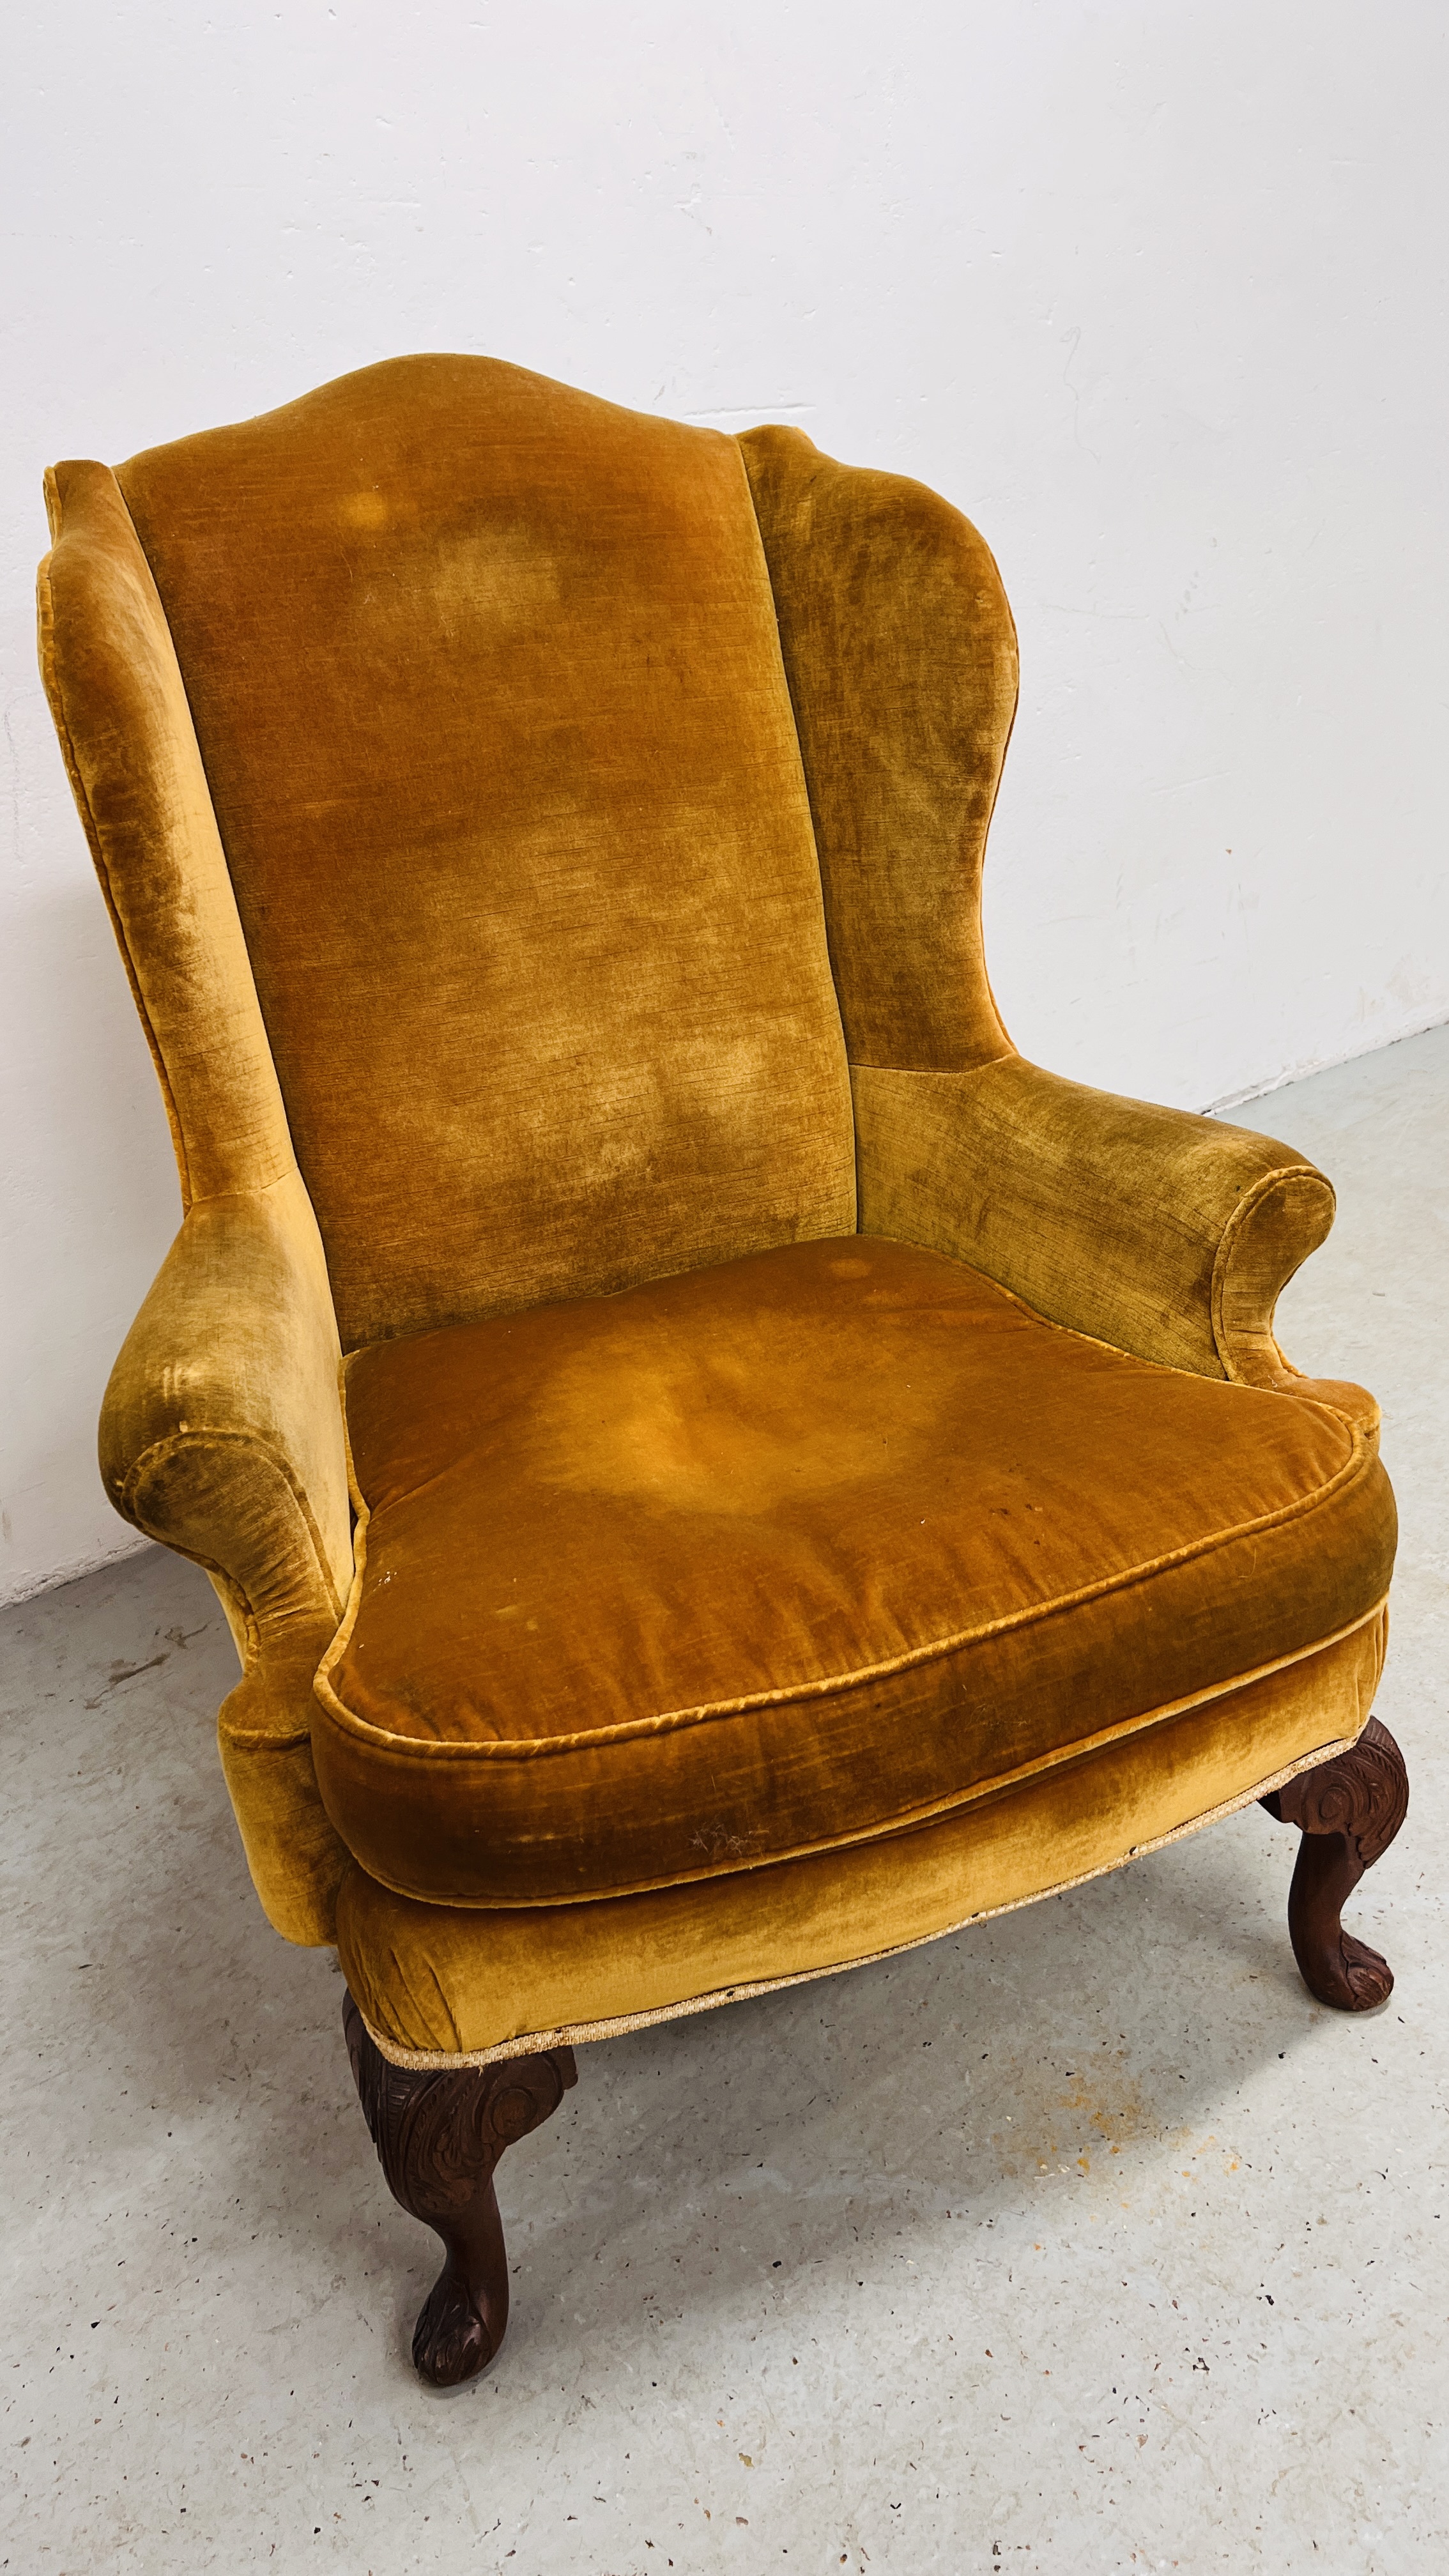 A MAHOGANY WINGED ARMCHAIR (COVER STAINED) - Image 6 of 7